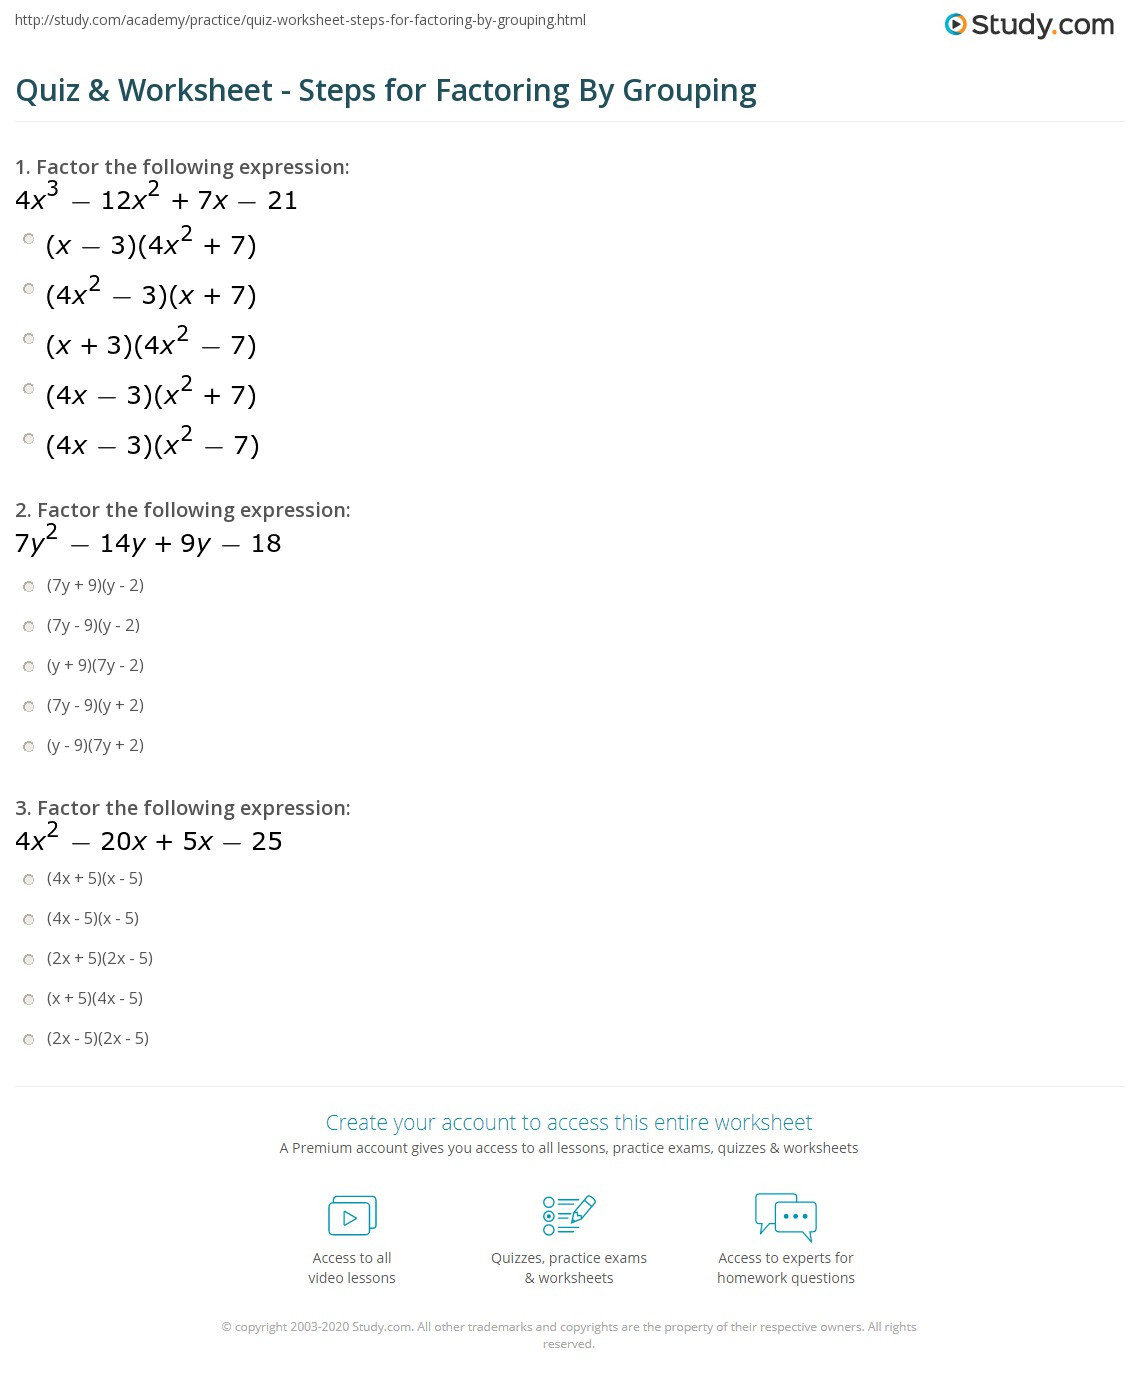 Factoring by Grouping Worksheet Quiz &amp; Worksheet Steps for Factoring by Grouping